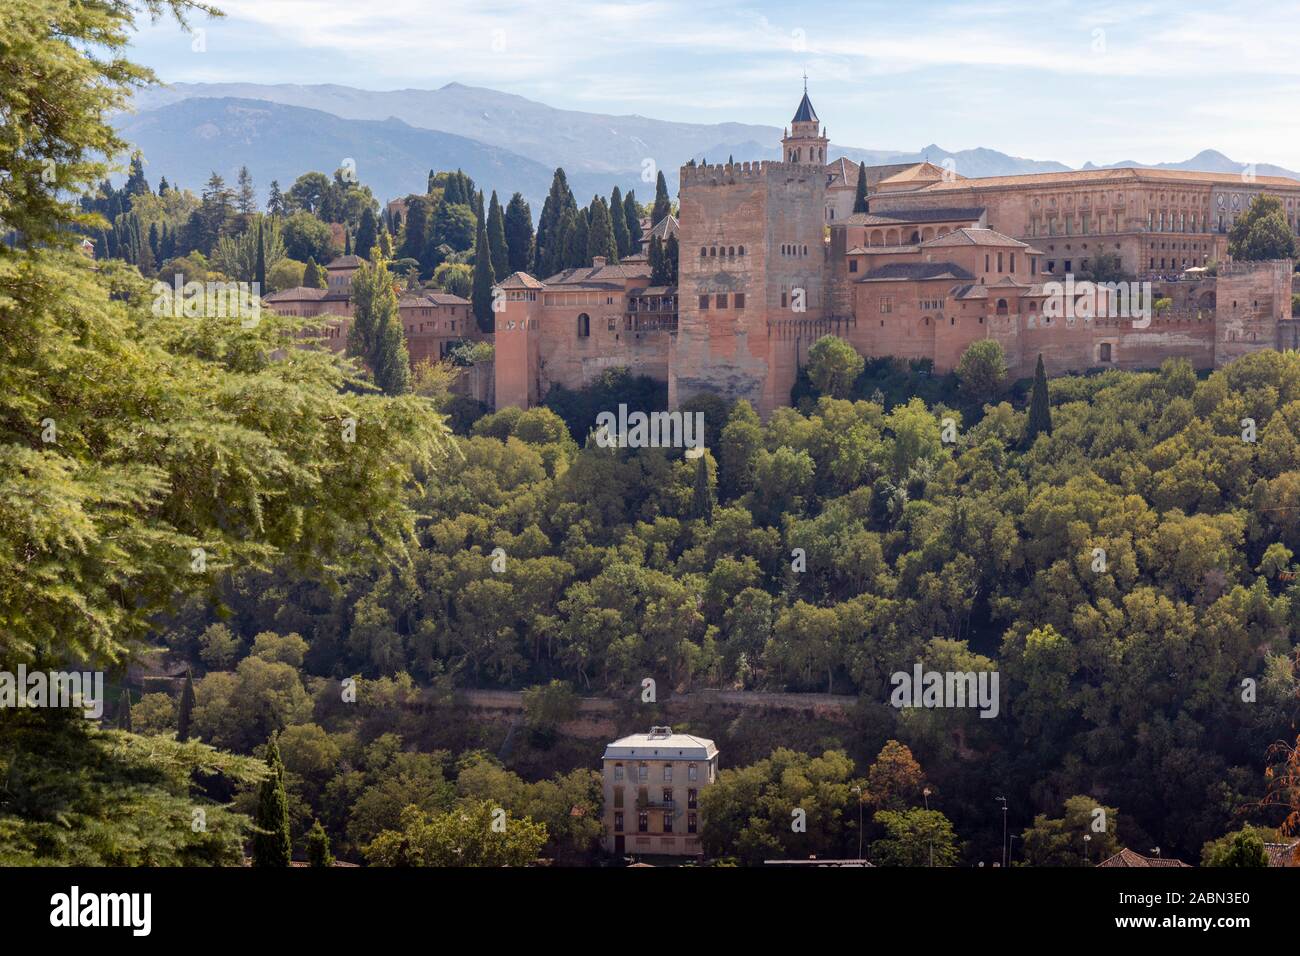 The Alhambra palace seen from the Albaicin, Granada, Granada Province, Andalusia, southern Spain. Stock Photo